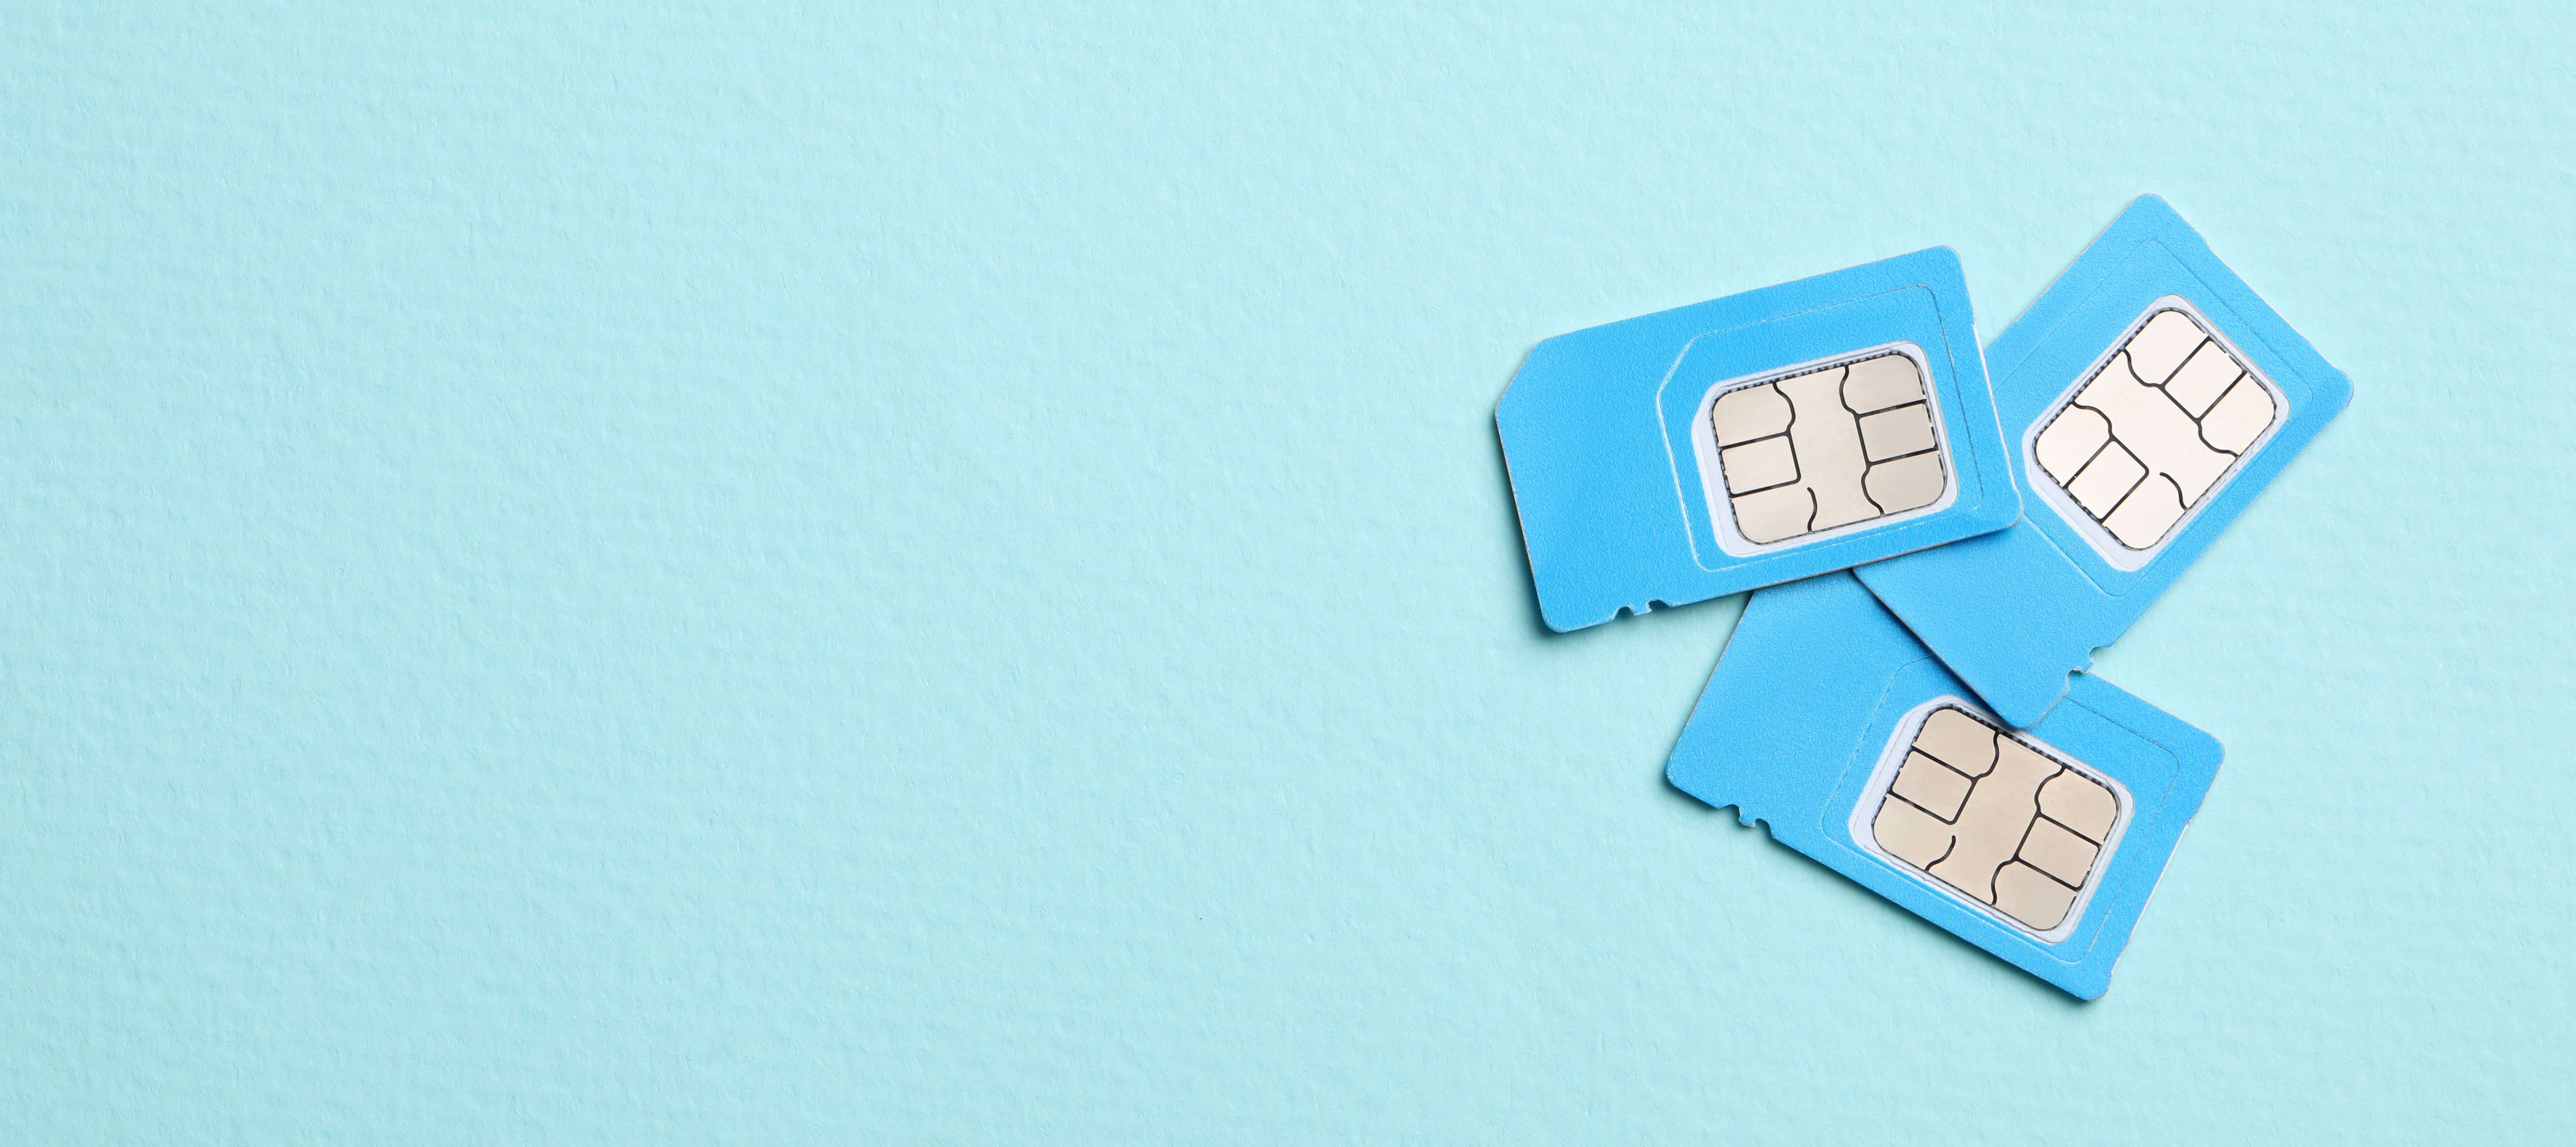 Three sim cards for mobile phone